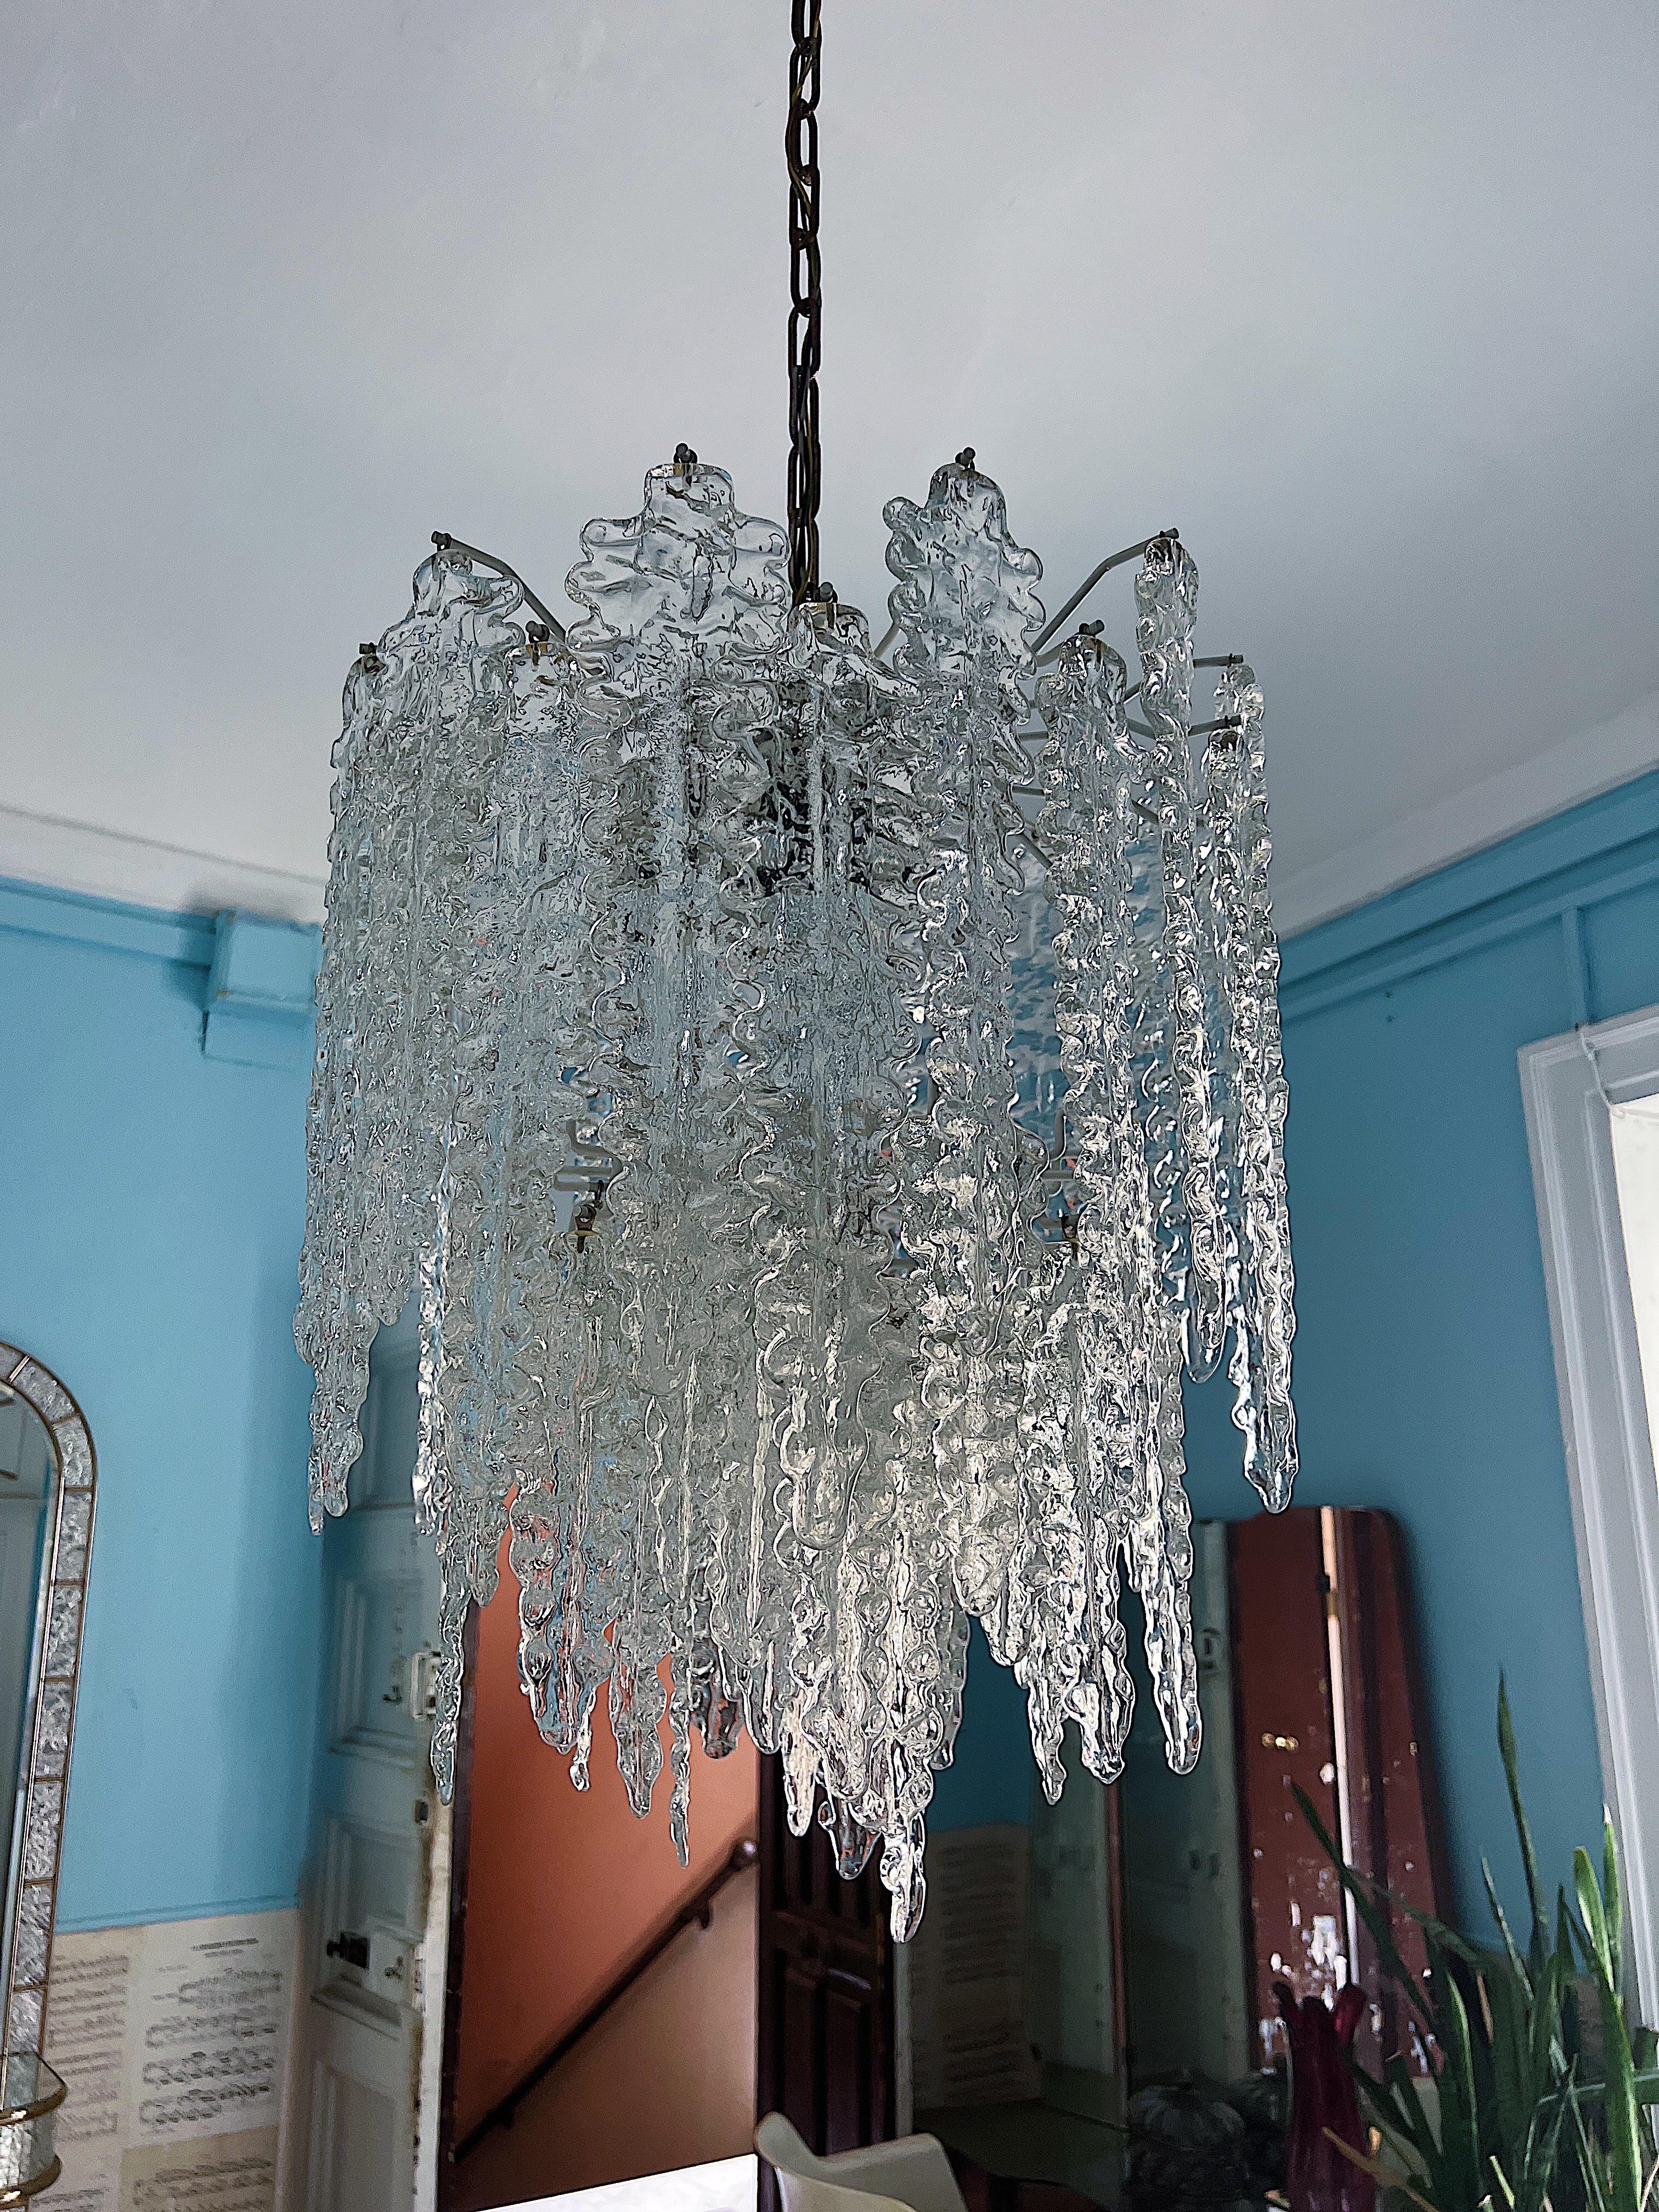 Italian Midcentury Chandelier by Venini, 1960s from the Alga Series For Sale